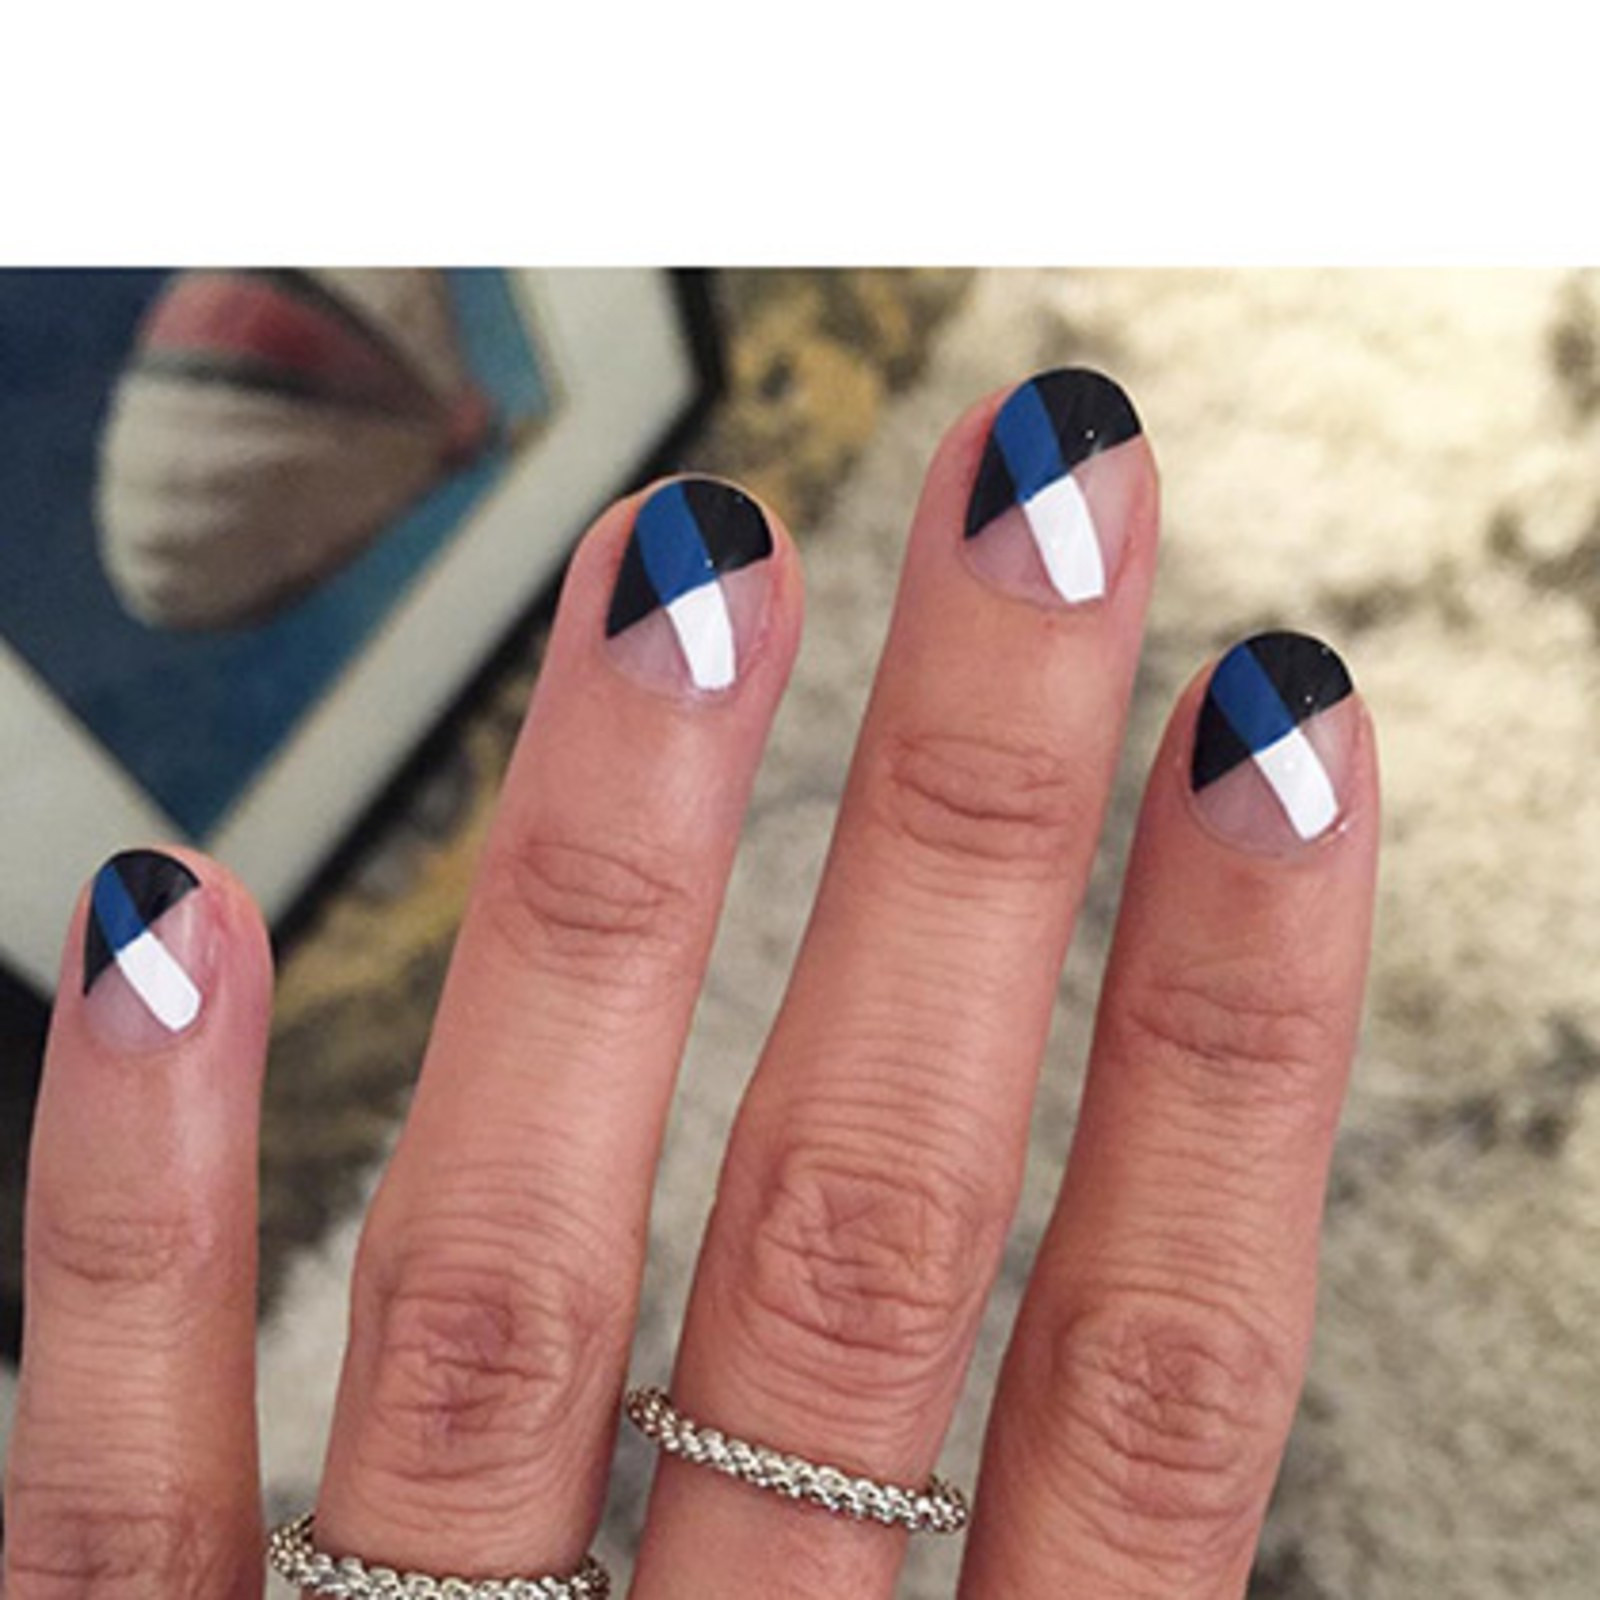 Chic Nail Designs
 25 Chic Nail Art Ideas for Summer Allure